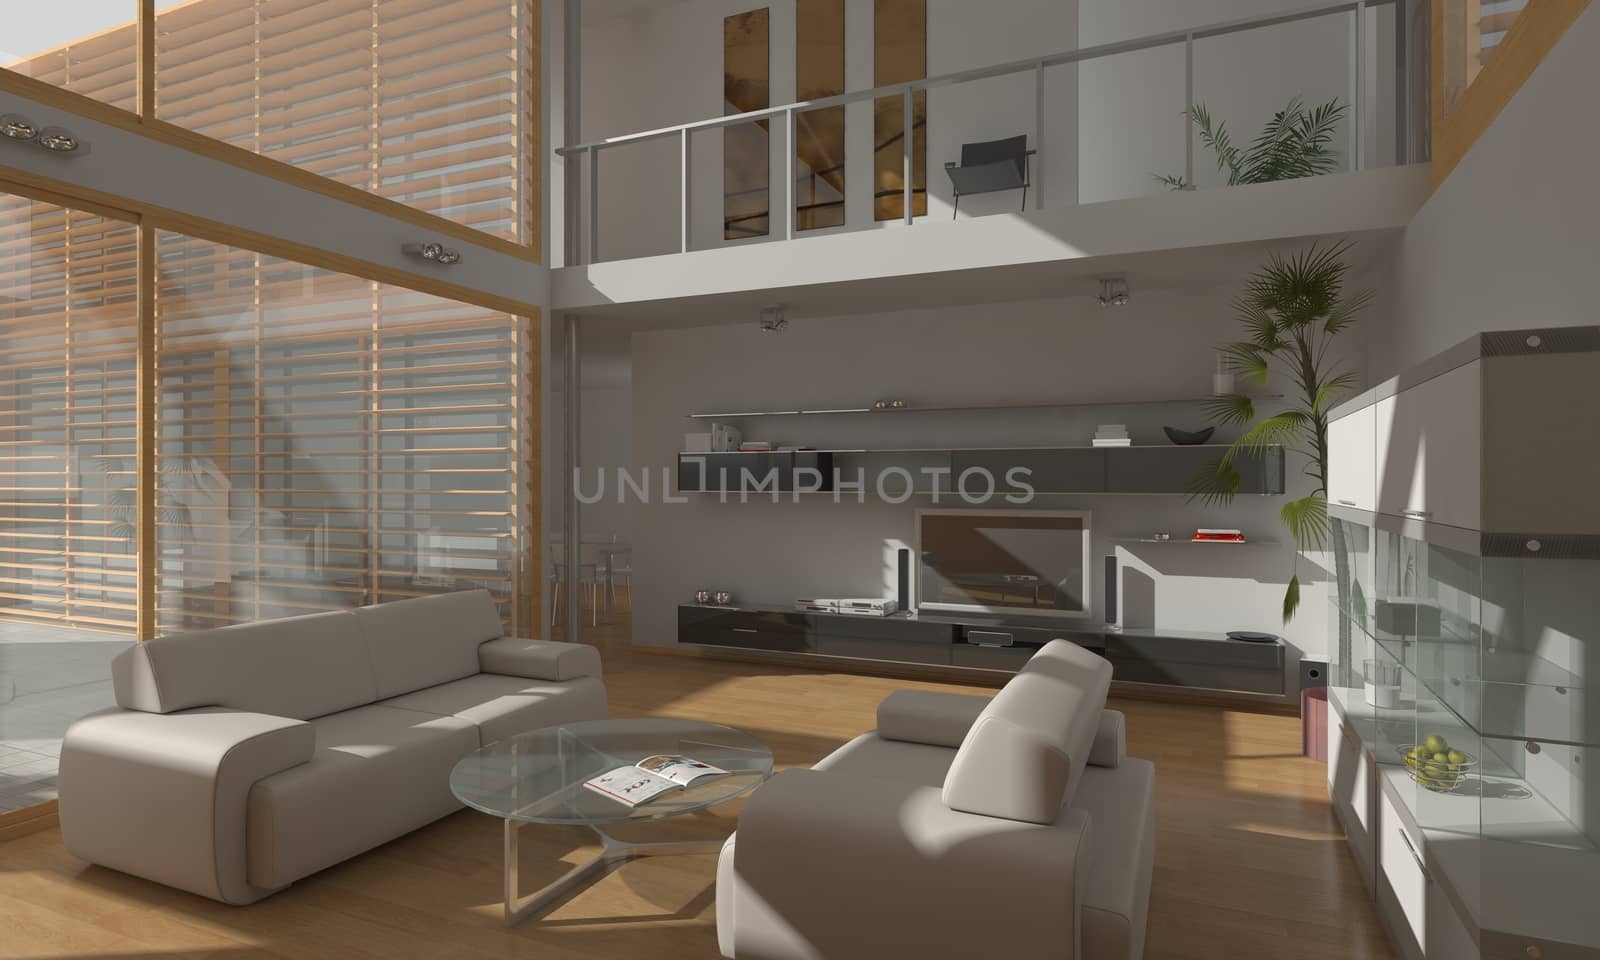 Photorealistic 3D render of a living room